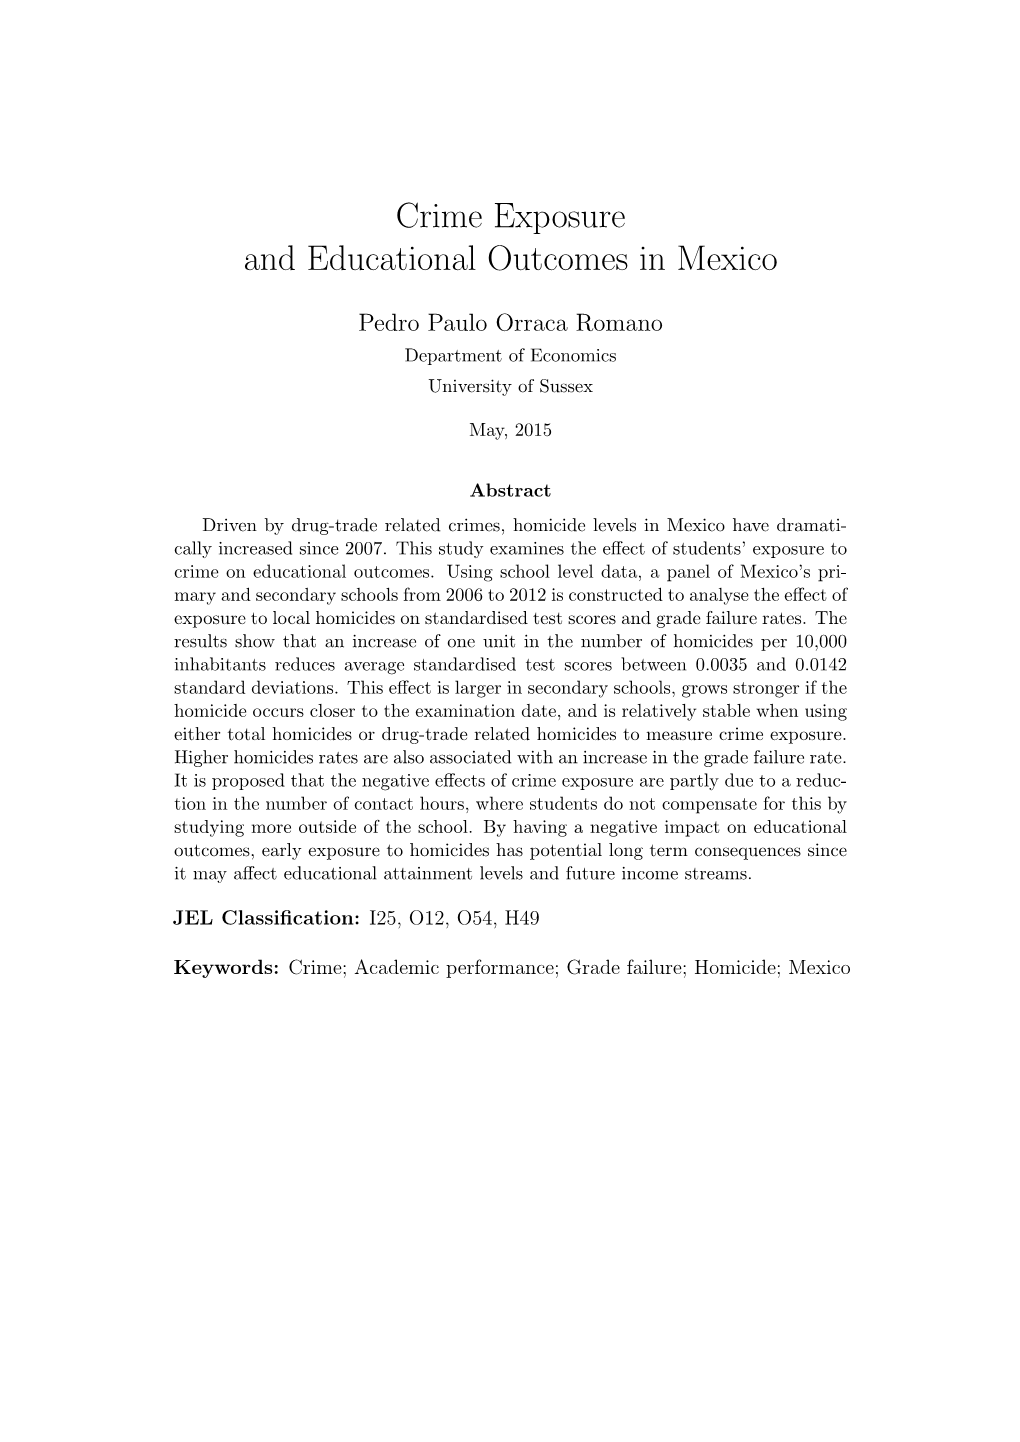 Crime Exposure and Educational Outcomes in Mexico